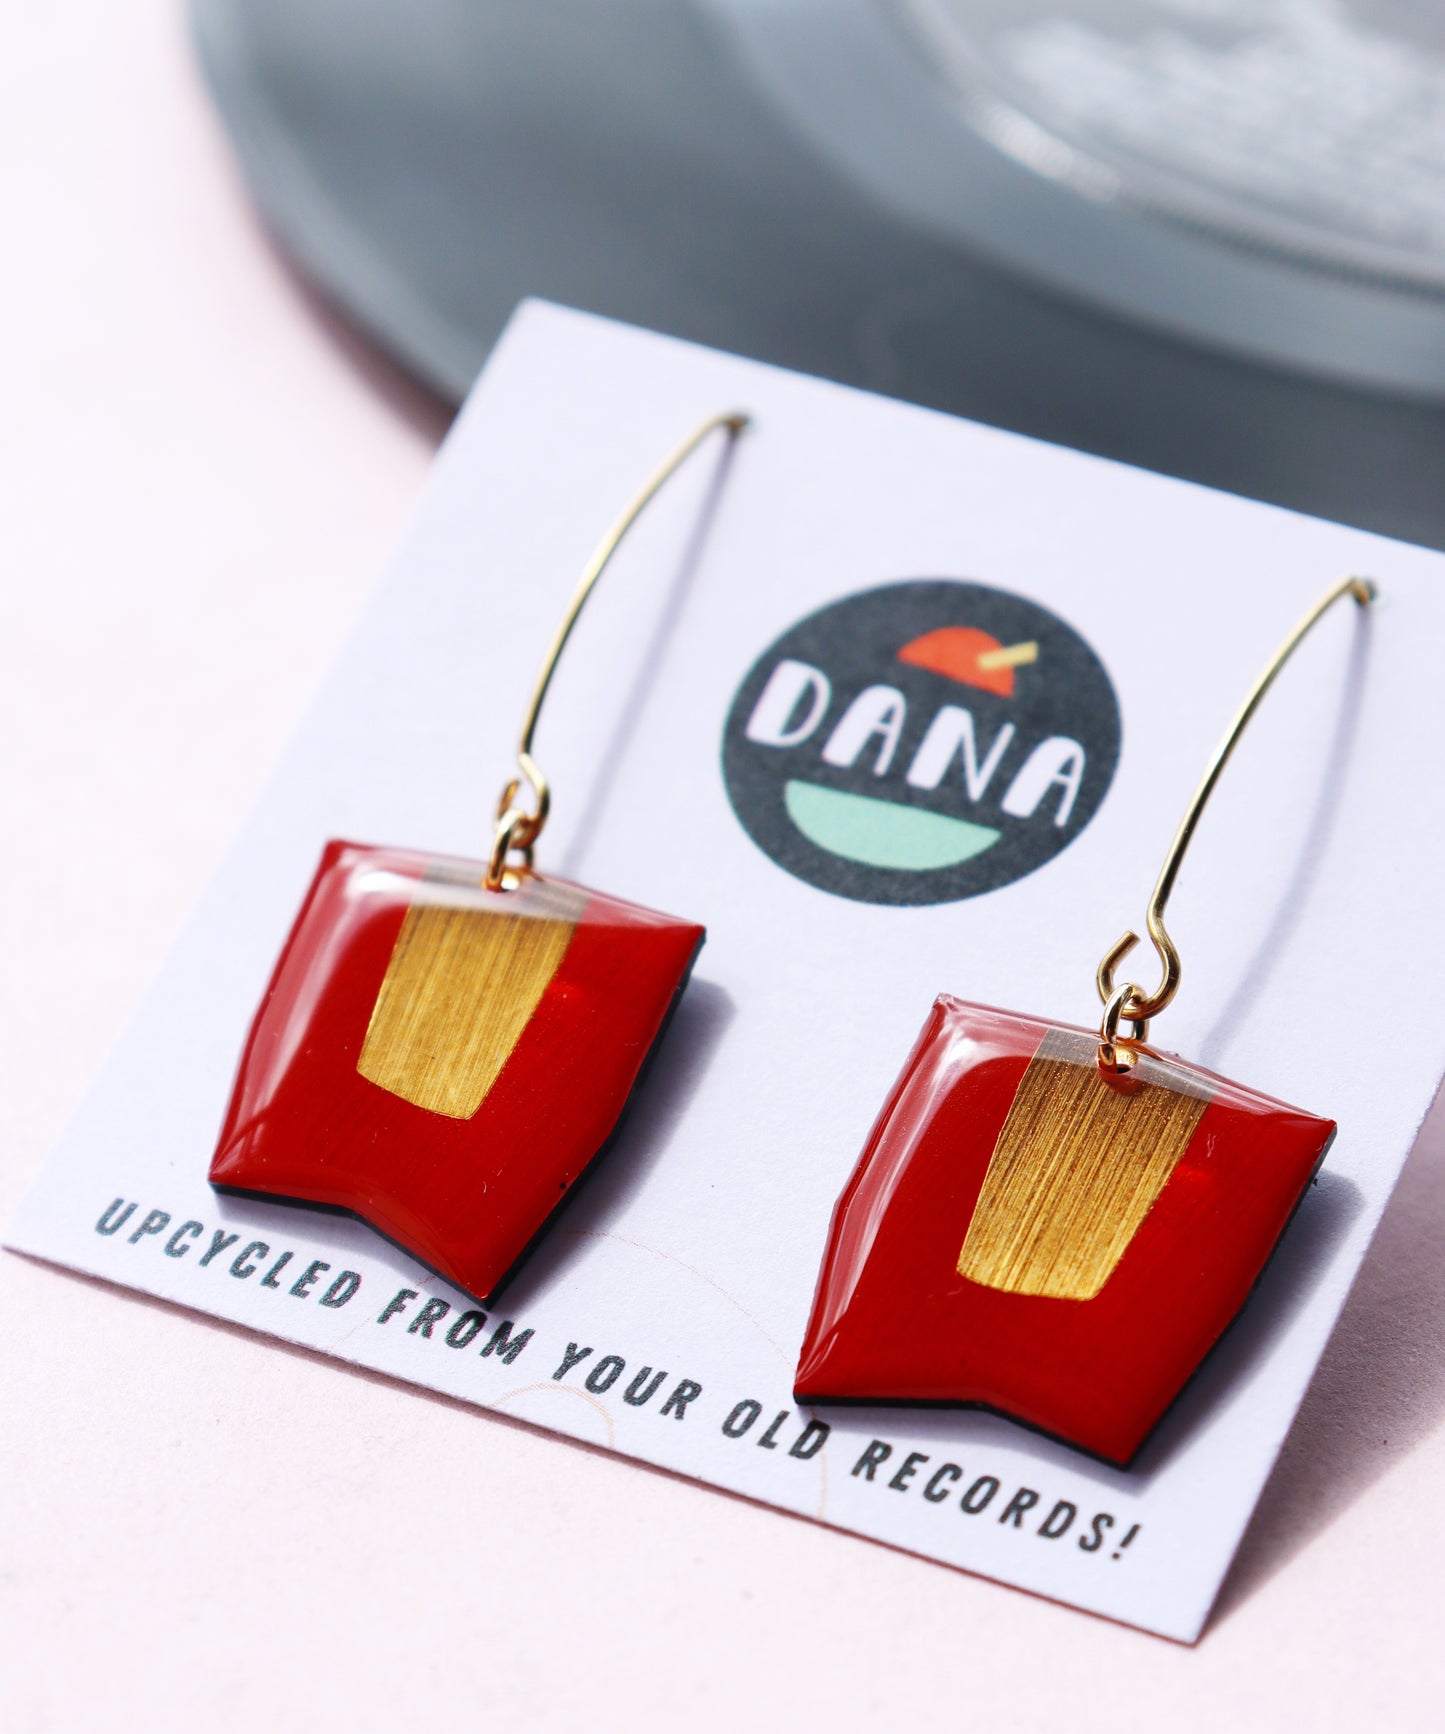 Festive edition of CONNIE in vibrant red and lush gold / upcycled chic earrings